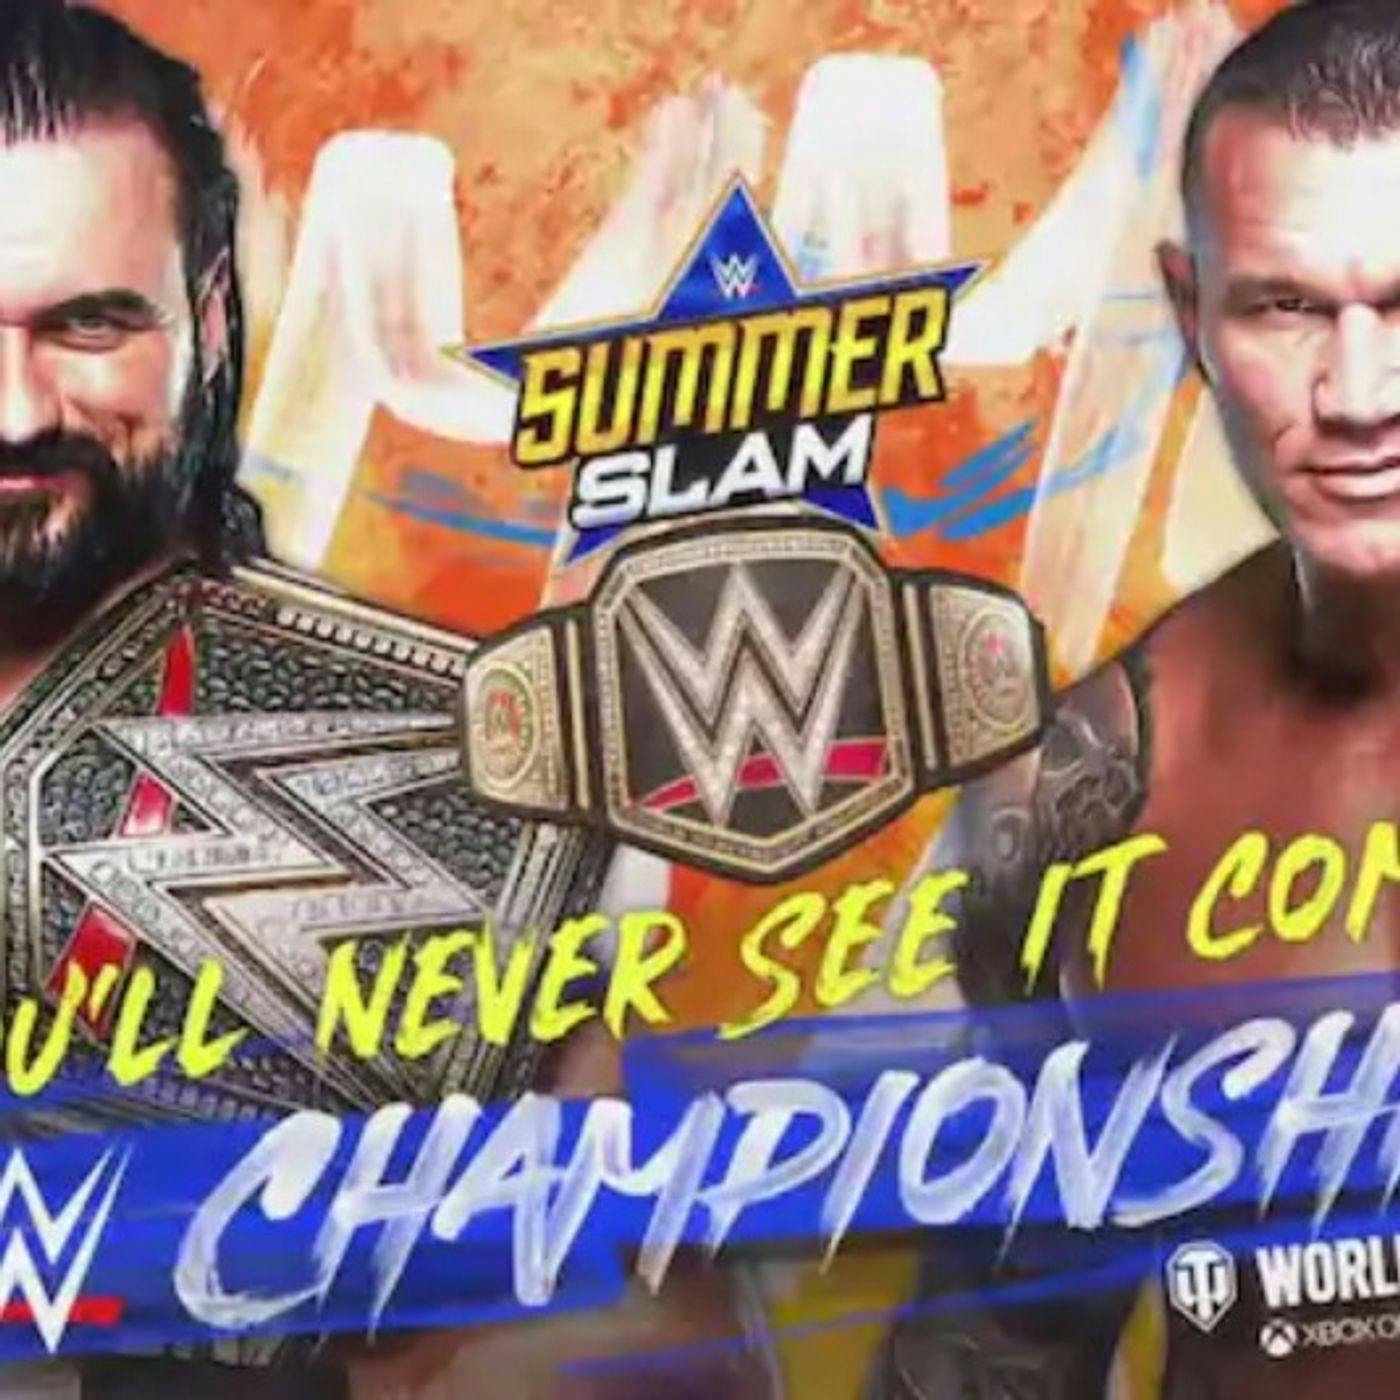 SummerSlam Preview with Nick Piccone and Jon Jansen on Fox Sports The Gambler